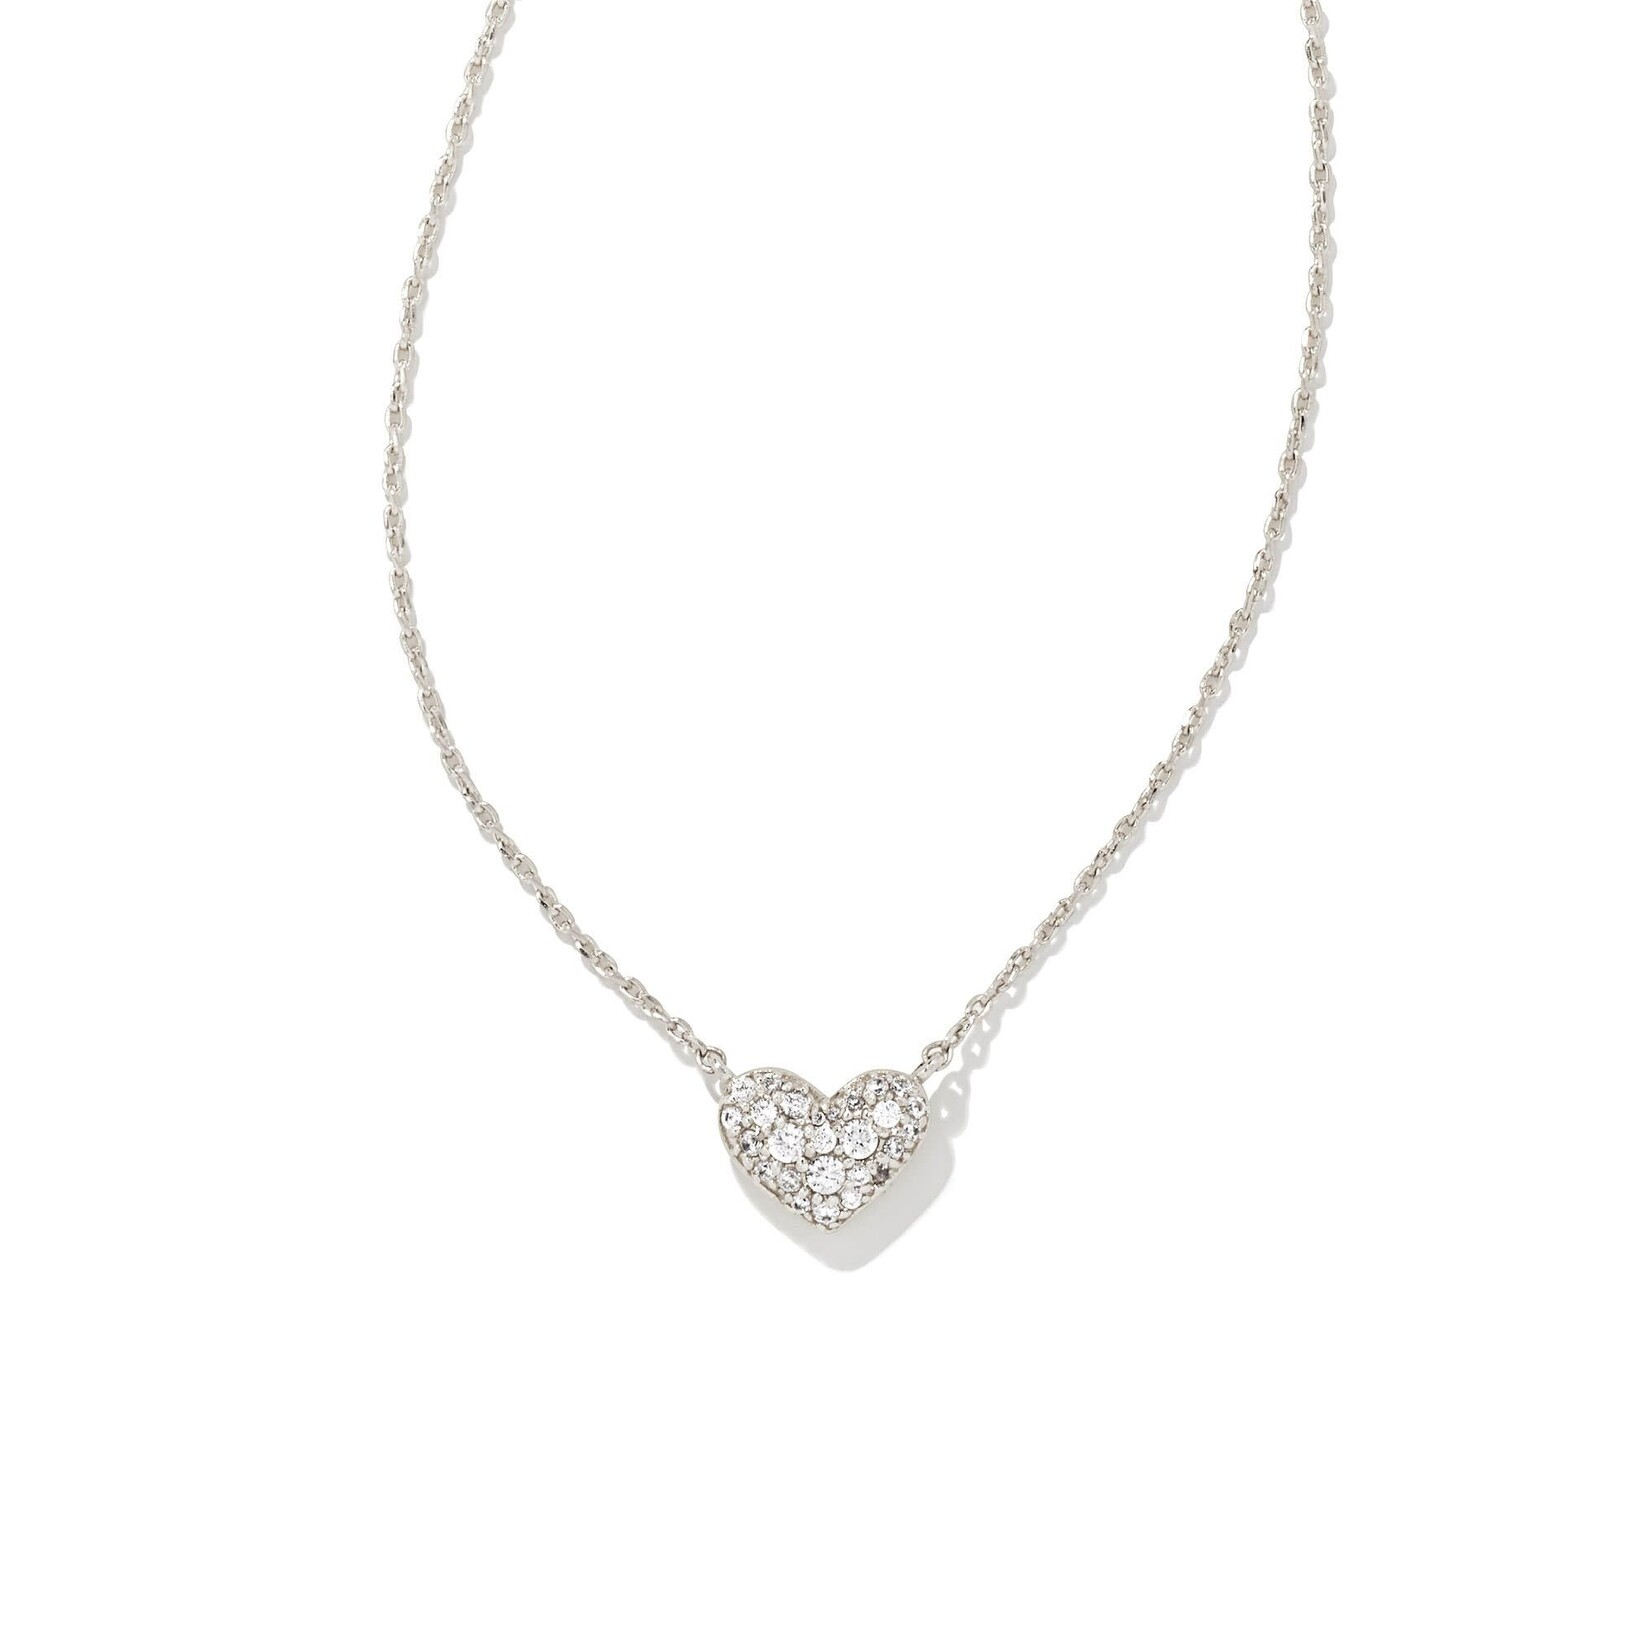 ARI CRYSTAL HEART PAVE NECKLACE